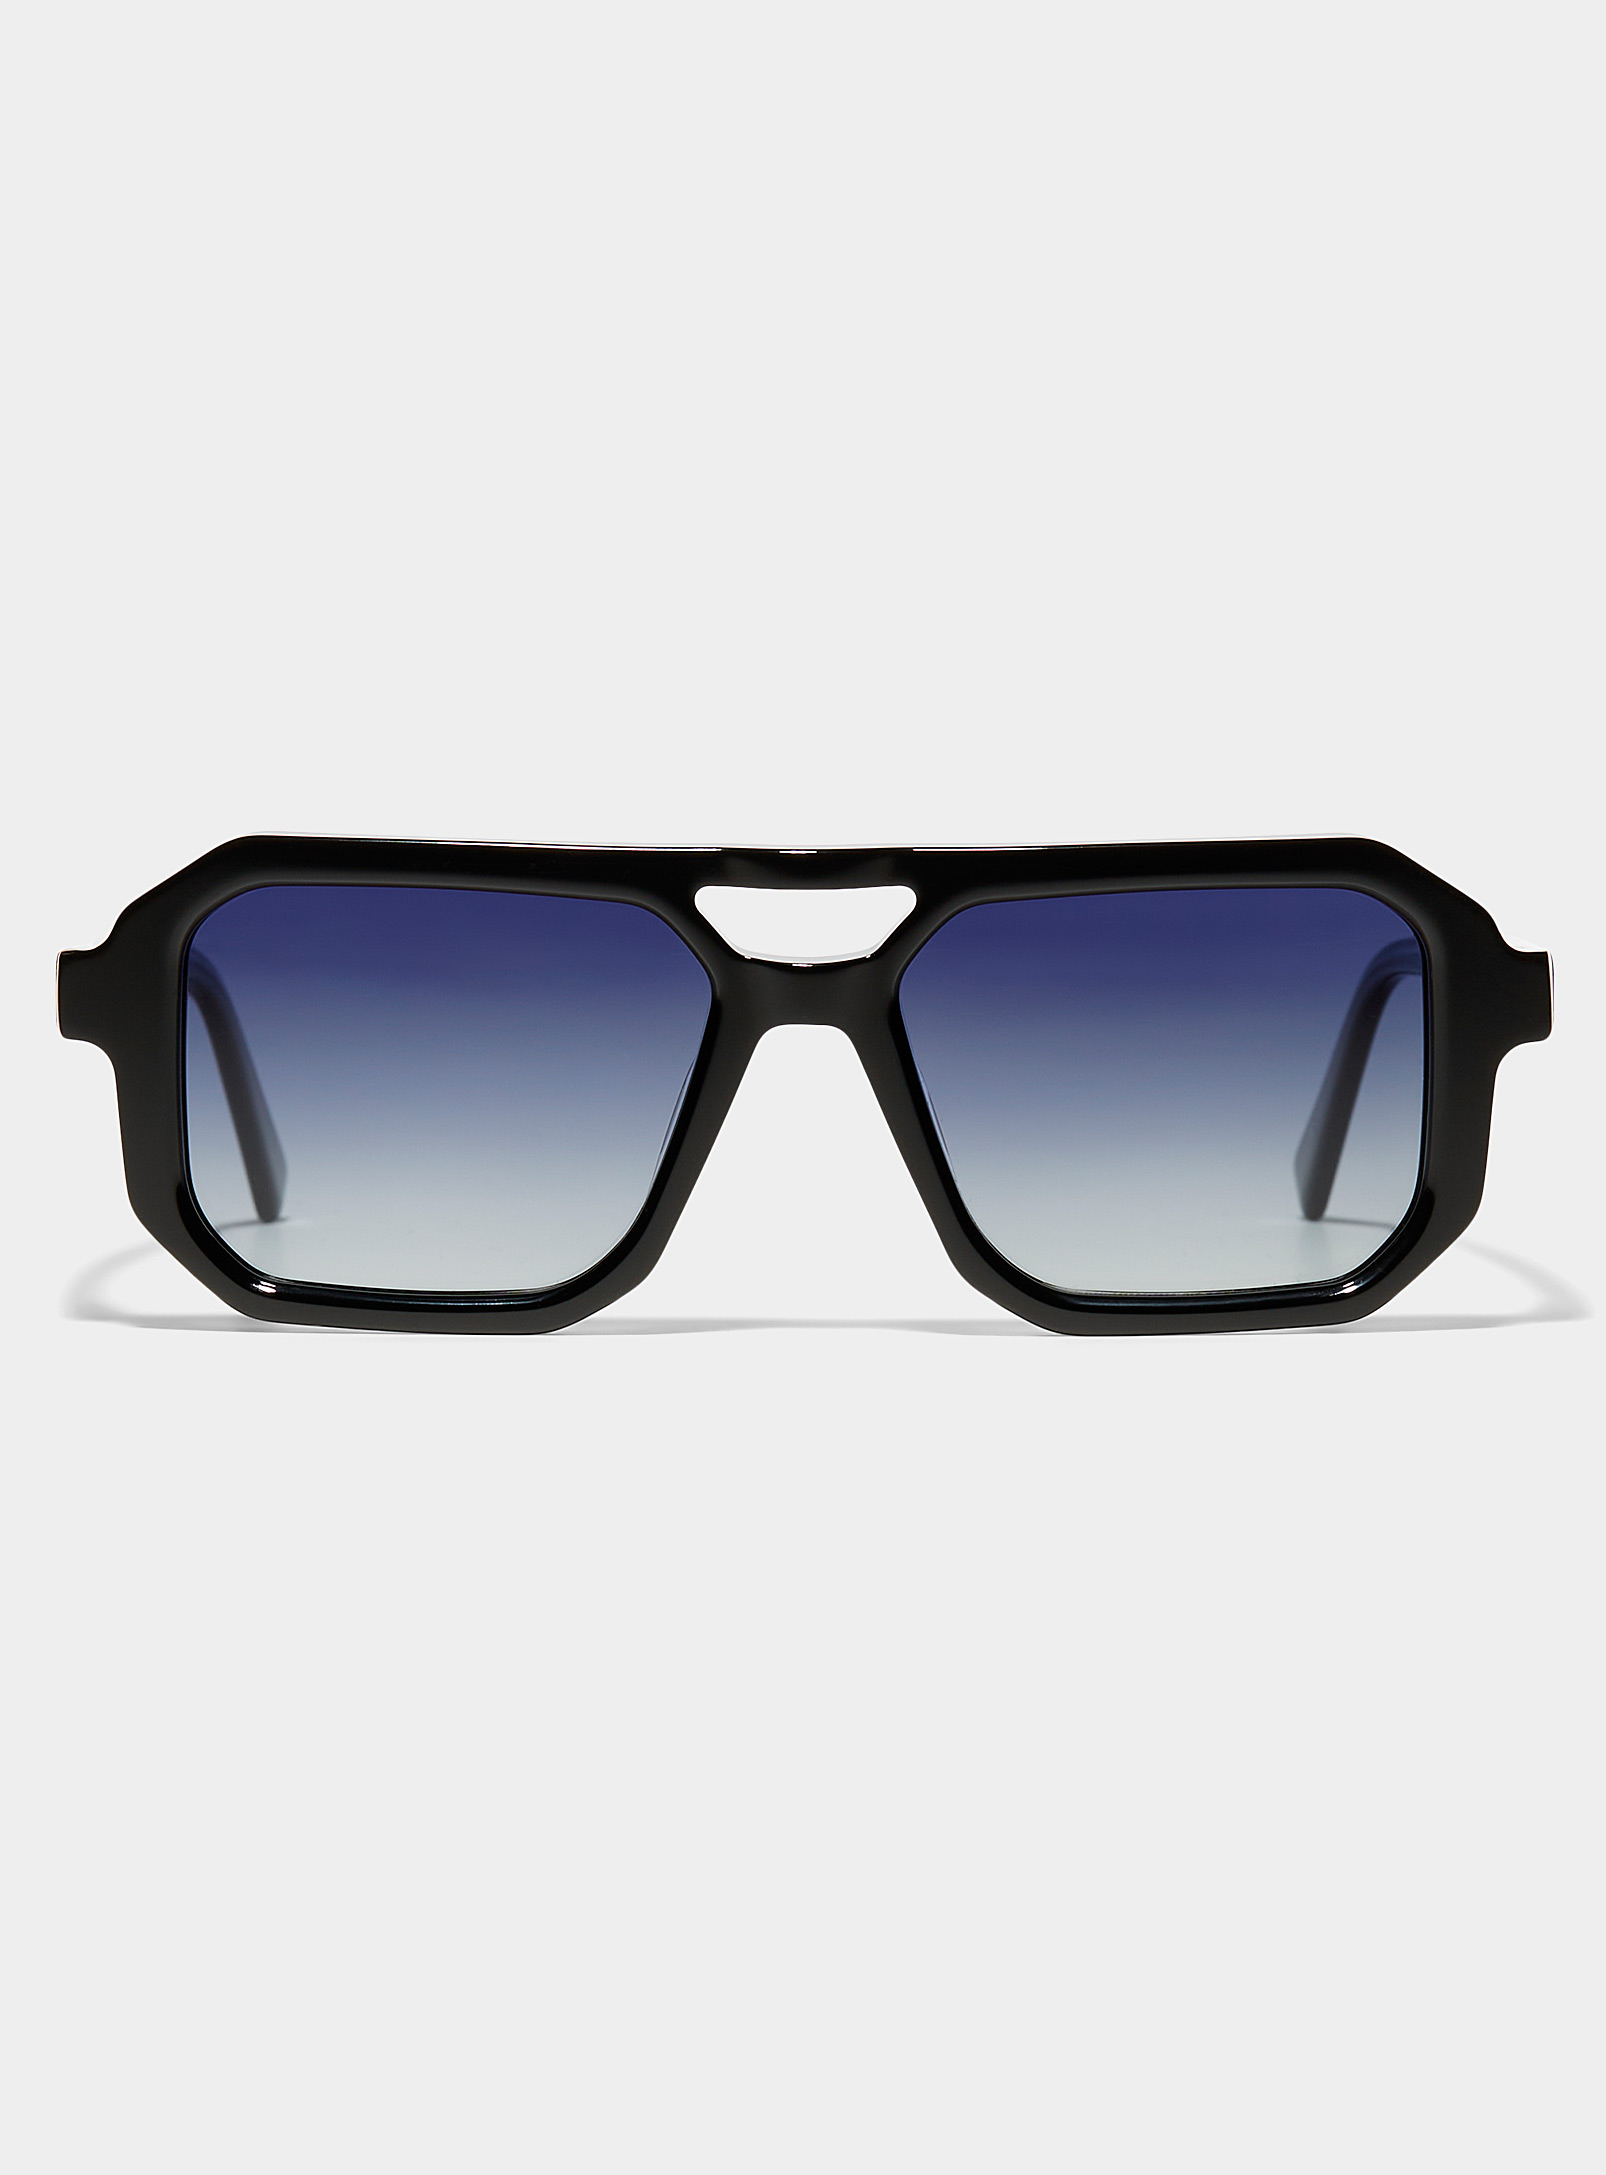 French Kiwis Cyril Square Sunglasses In Black